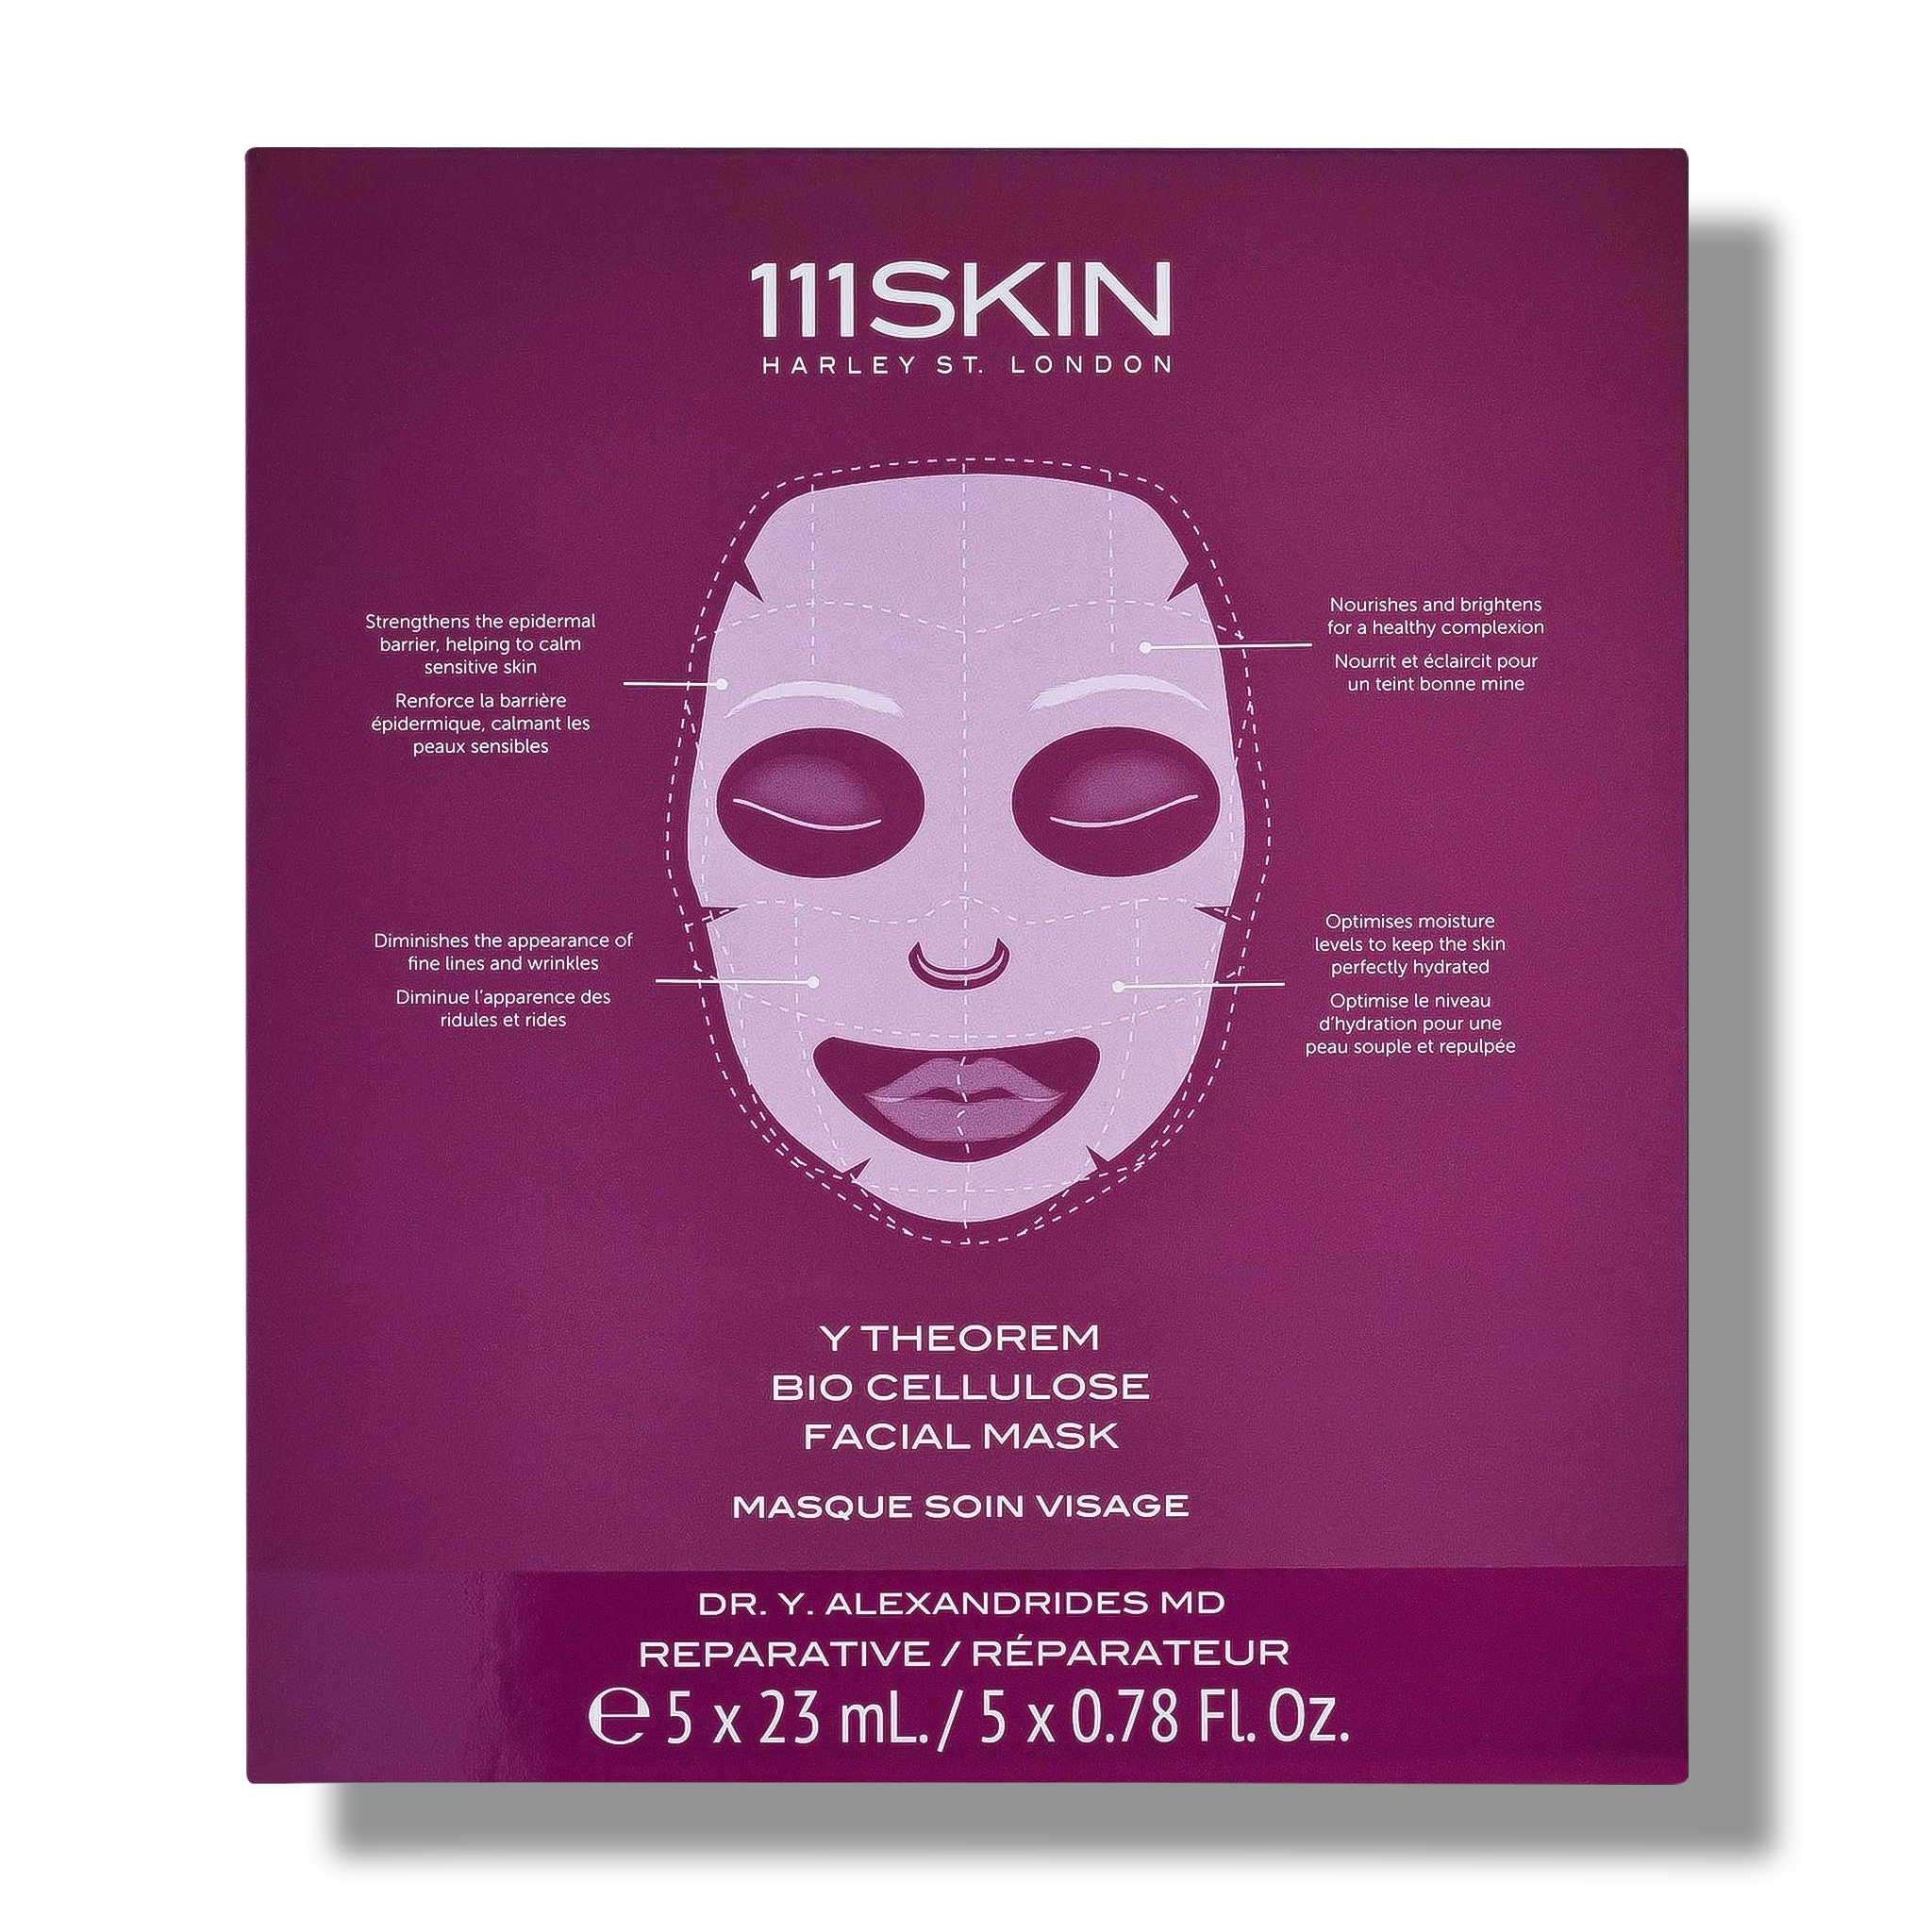 111SKIN - Y Theorem Bio Cellulose Facial Mask Box, Oh Beauty